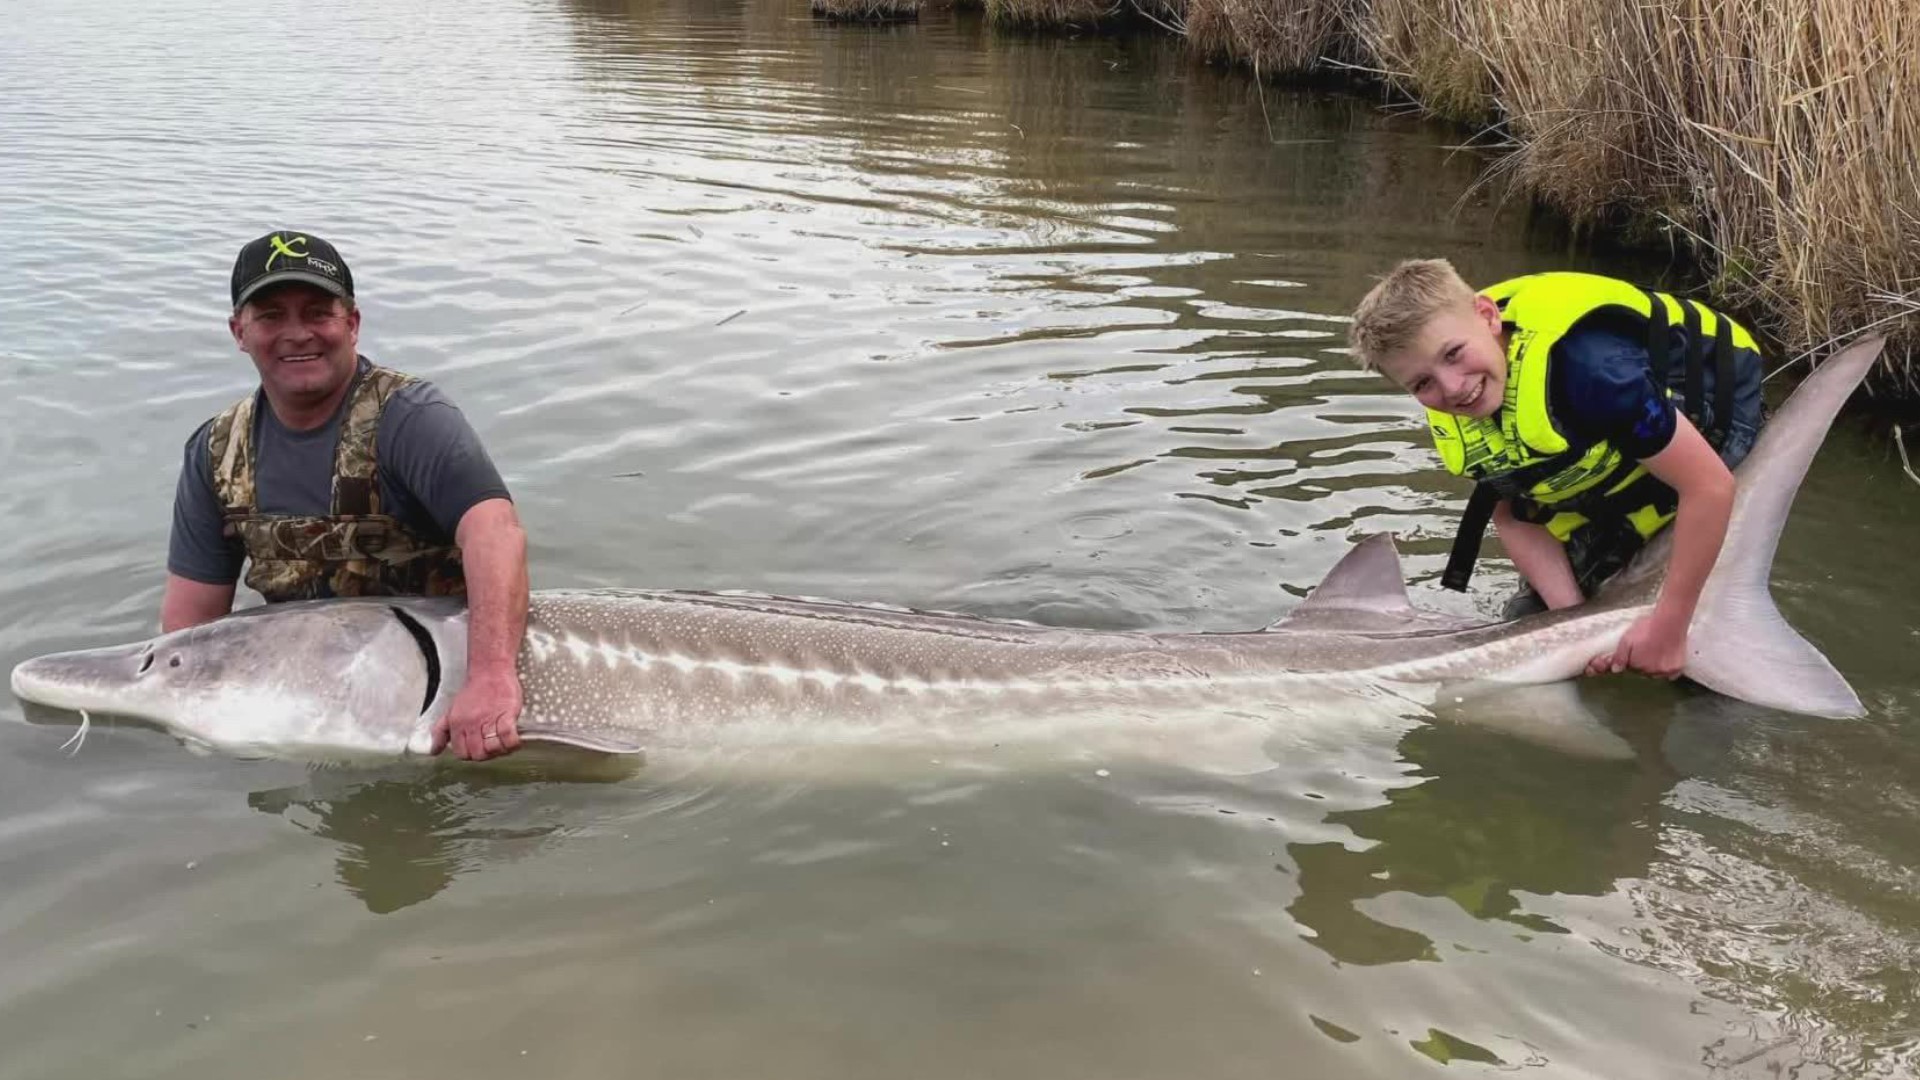 Tyler Grimshaw reeled in the massive sturgeon -- which measured 9'11" -- with his dad Lance and Jones Sport Fishing guide Joe Weisner.